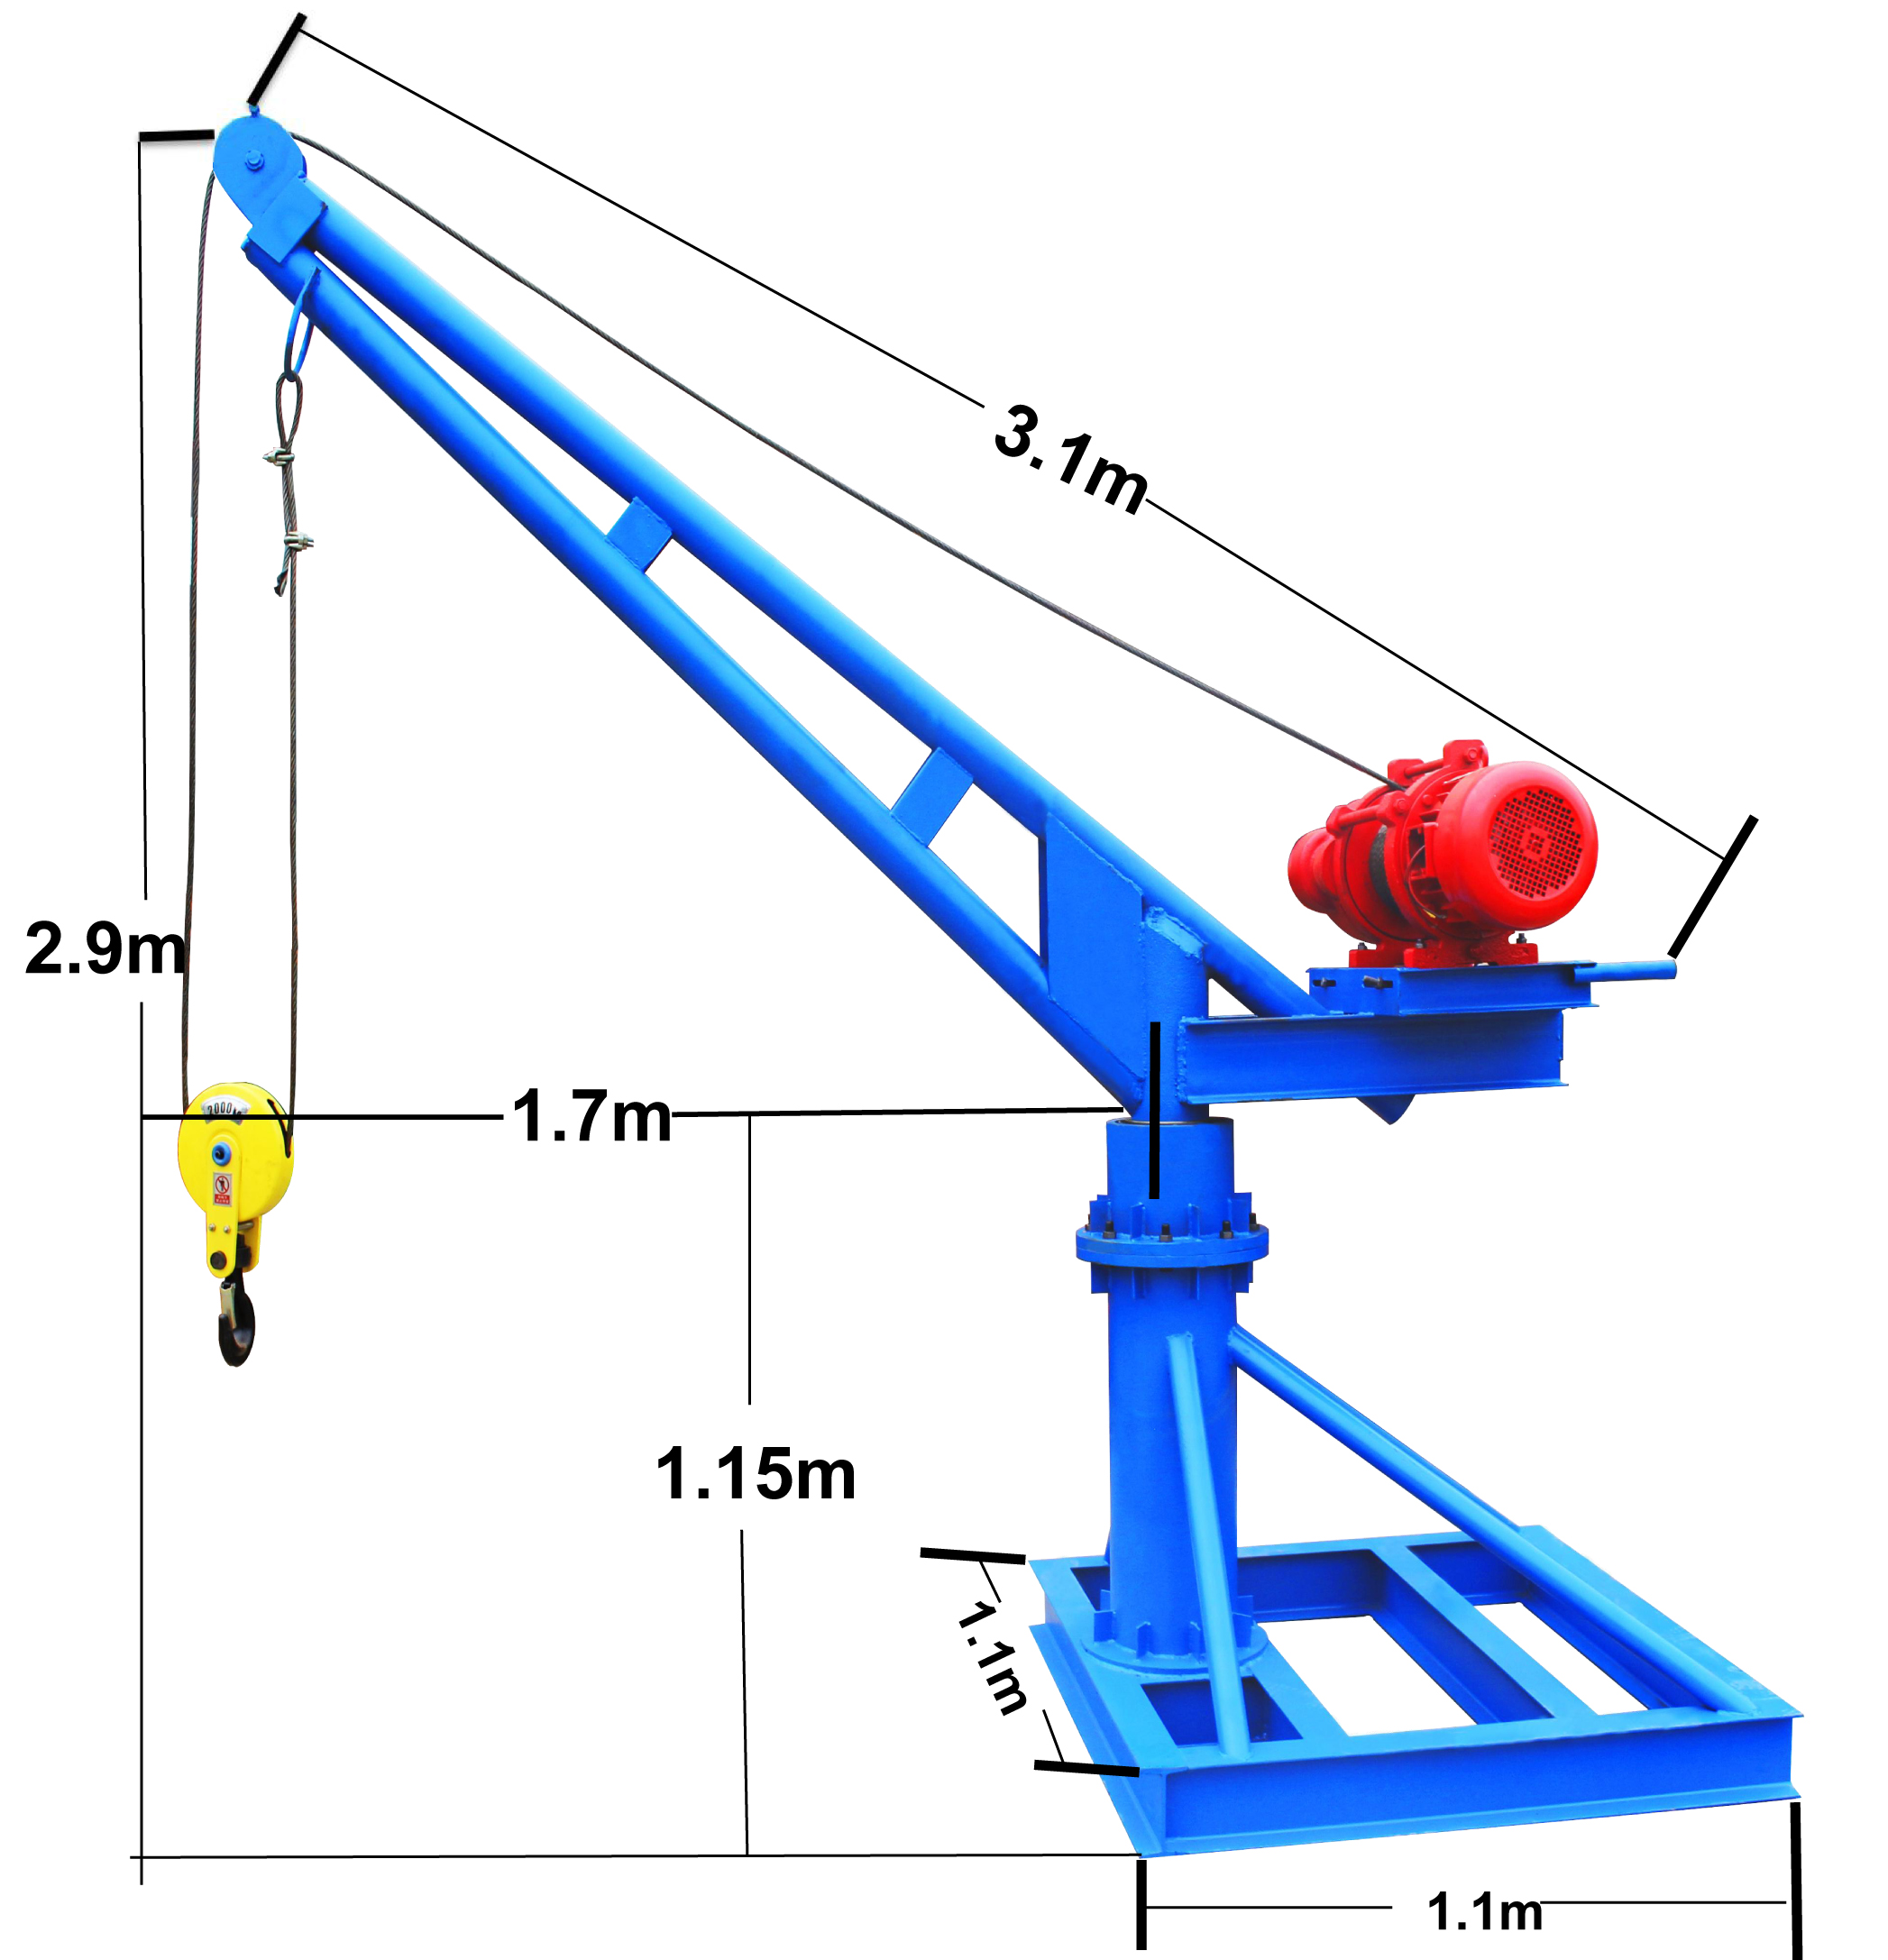 What are some common safety guidelines for operating material lifting cranes?